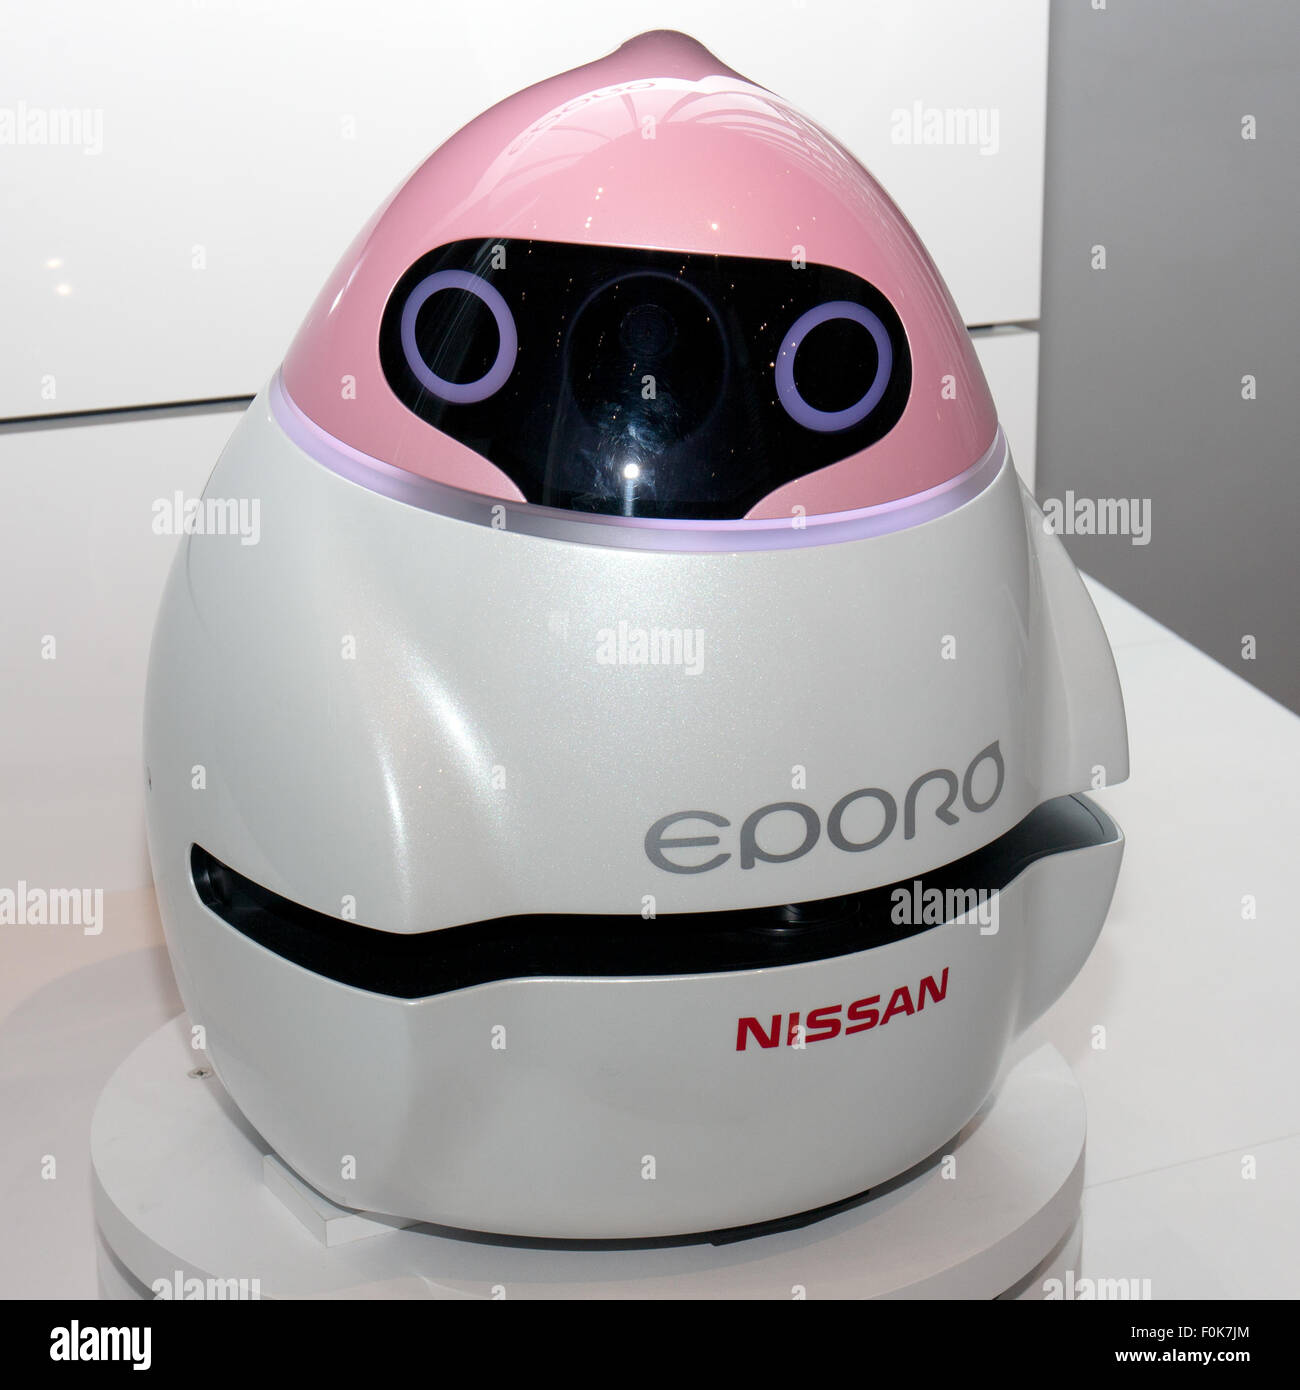 2015 Nissan Nissan Eporo Siège Mondial Gallery Banque D'Images